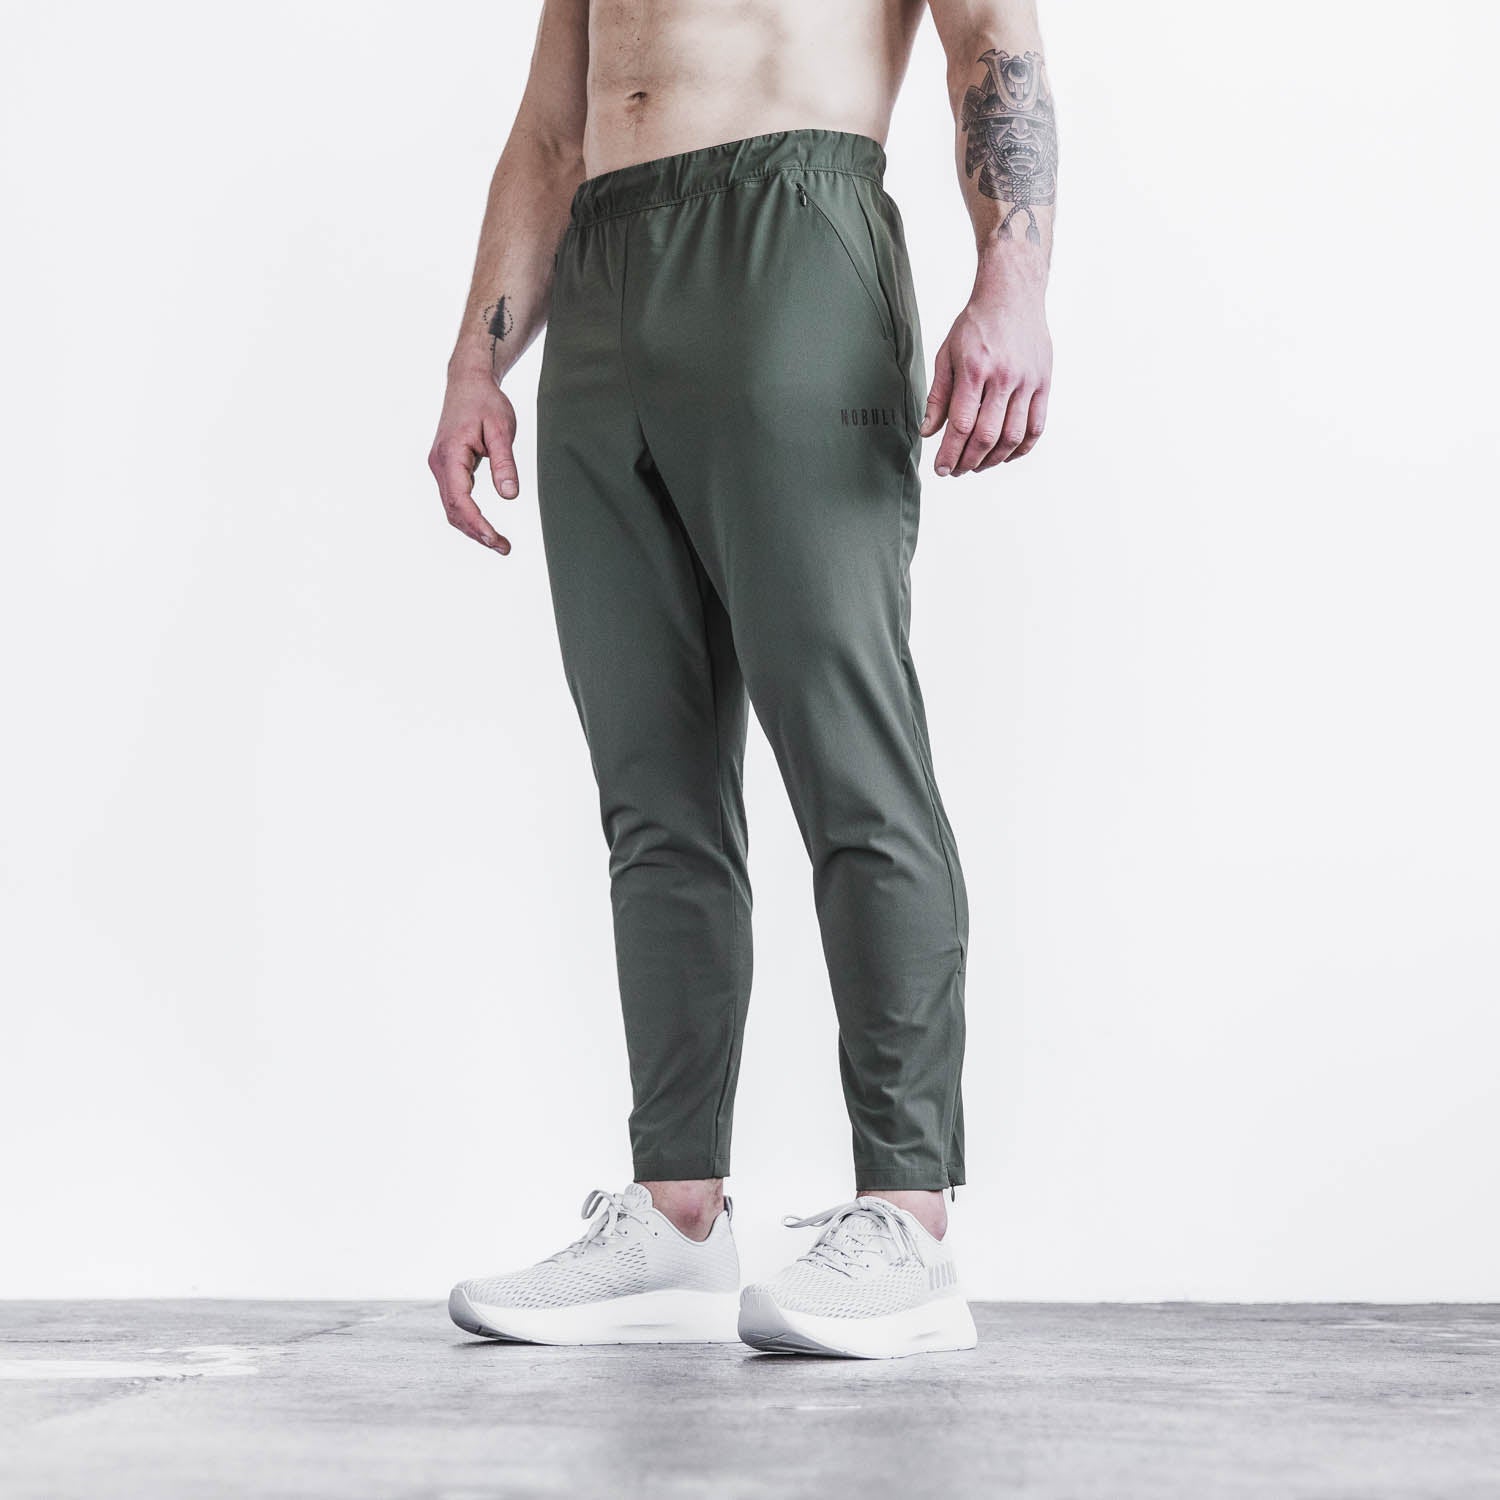 Lycra Track Pants Men - Wholesale Price, Size: Free Size 24 To 34inch at Rs  179/piece in Bengaluru